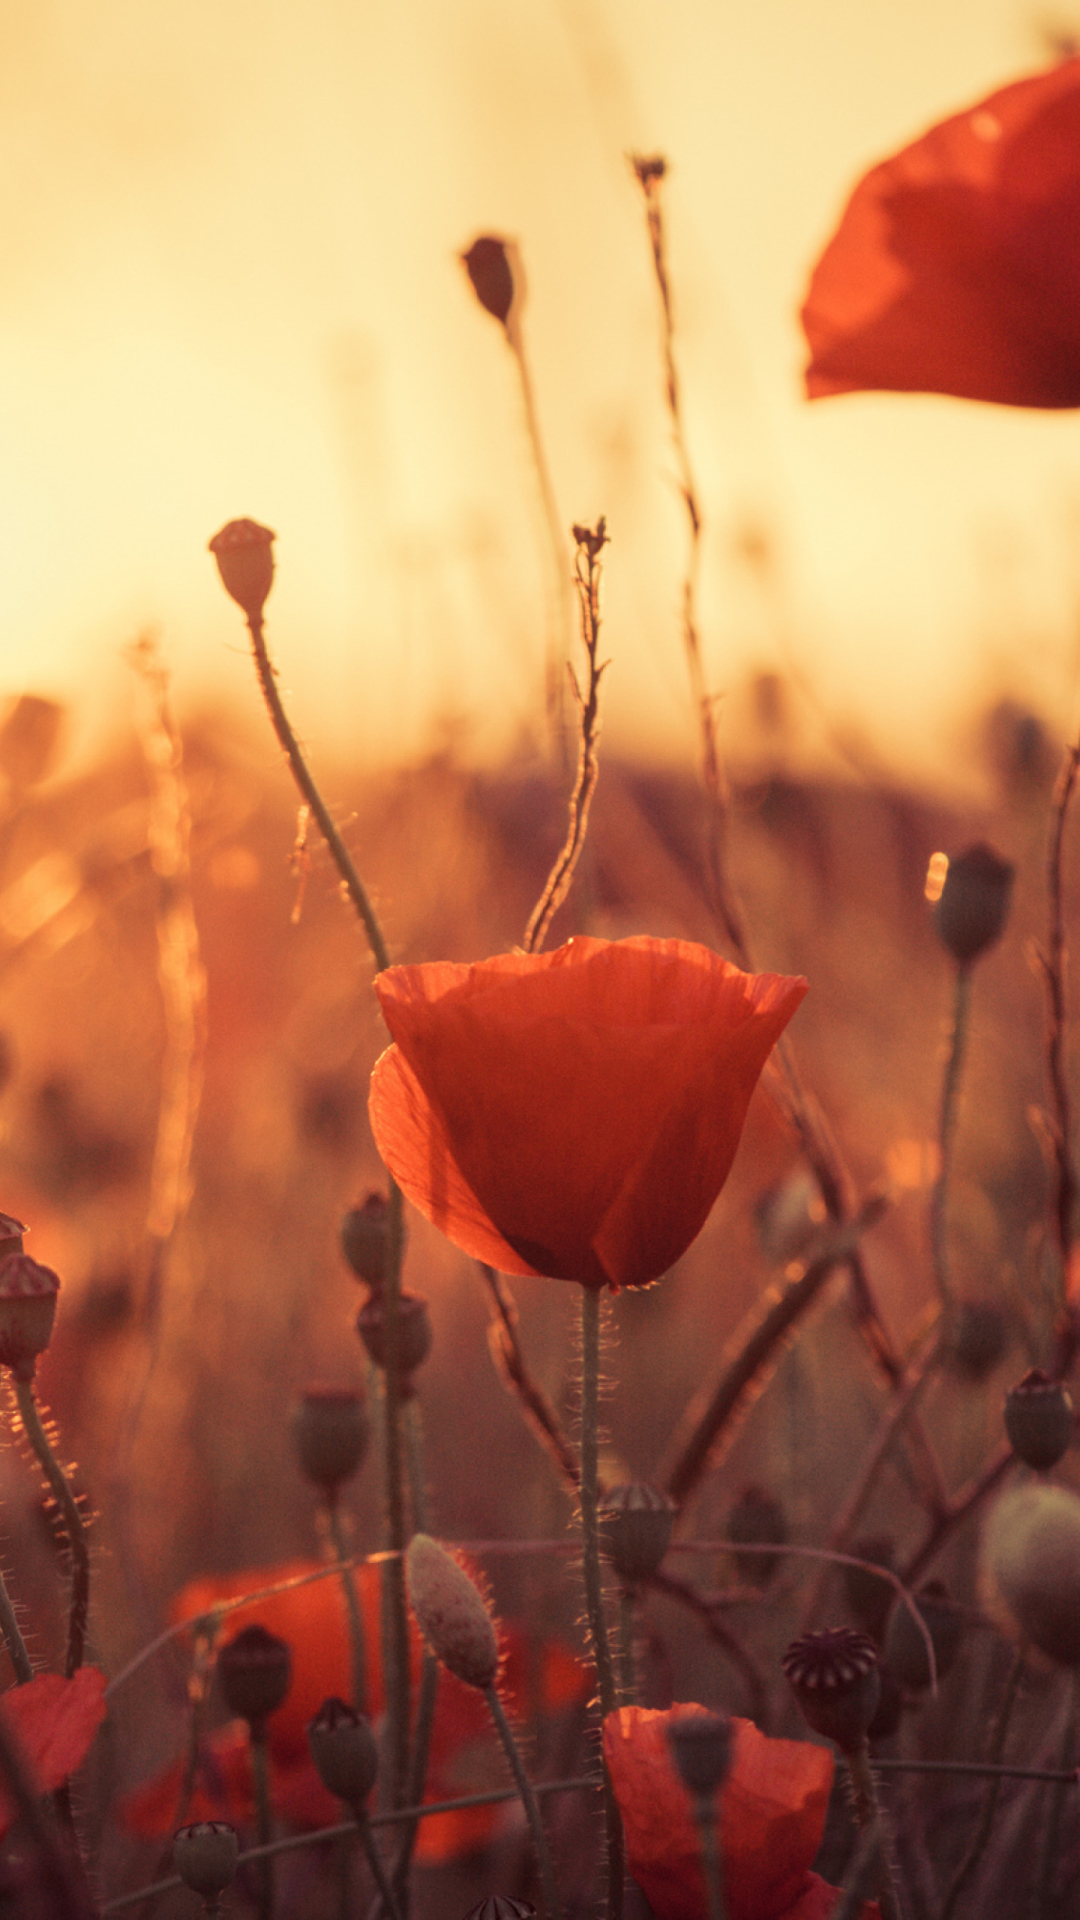 Poppies At Sunset wallpaper 1080x1920